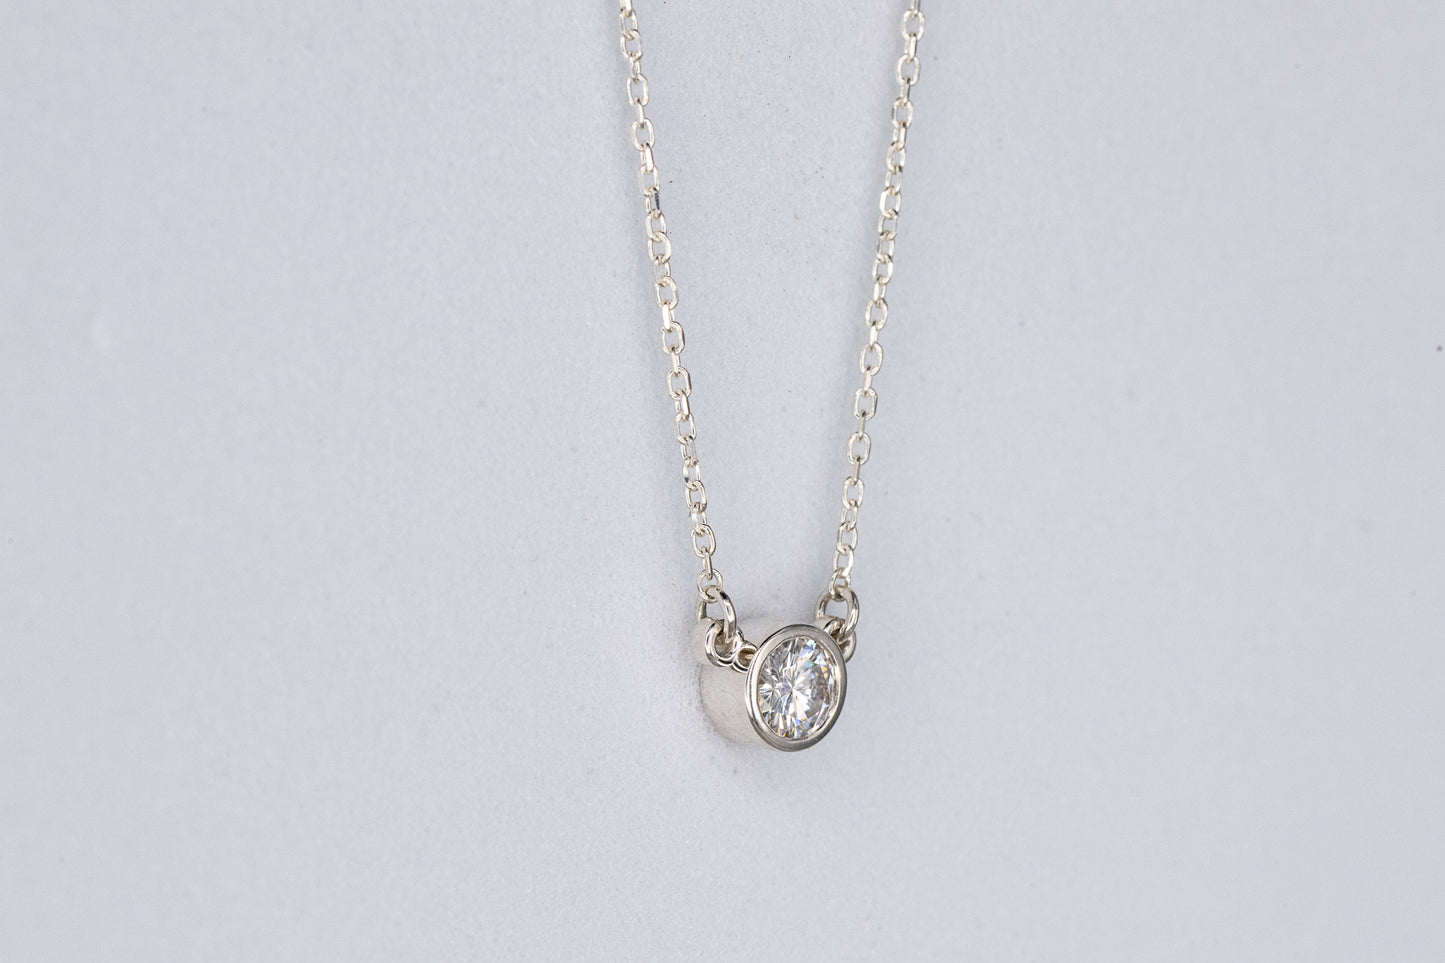 A Moissanite Sterling Silver Necklace with a small diamond, handmade by Cassin Jewelry.